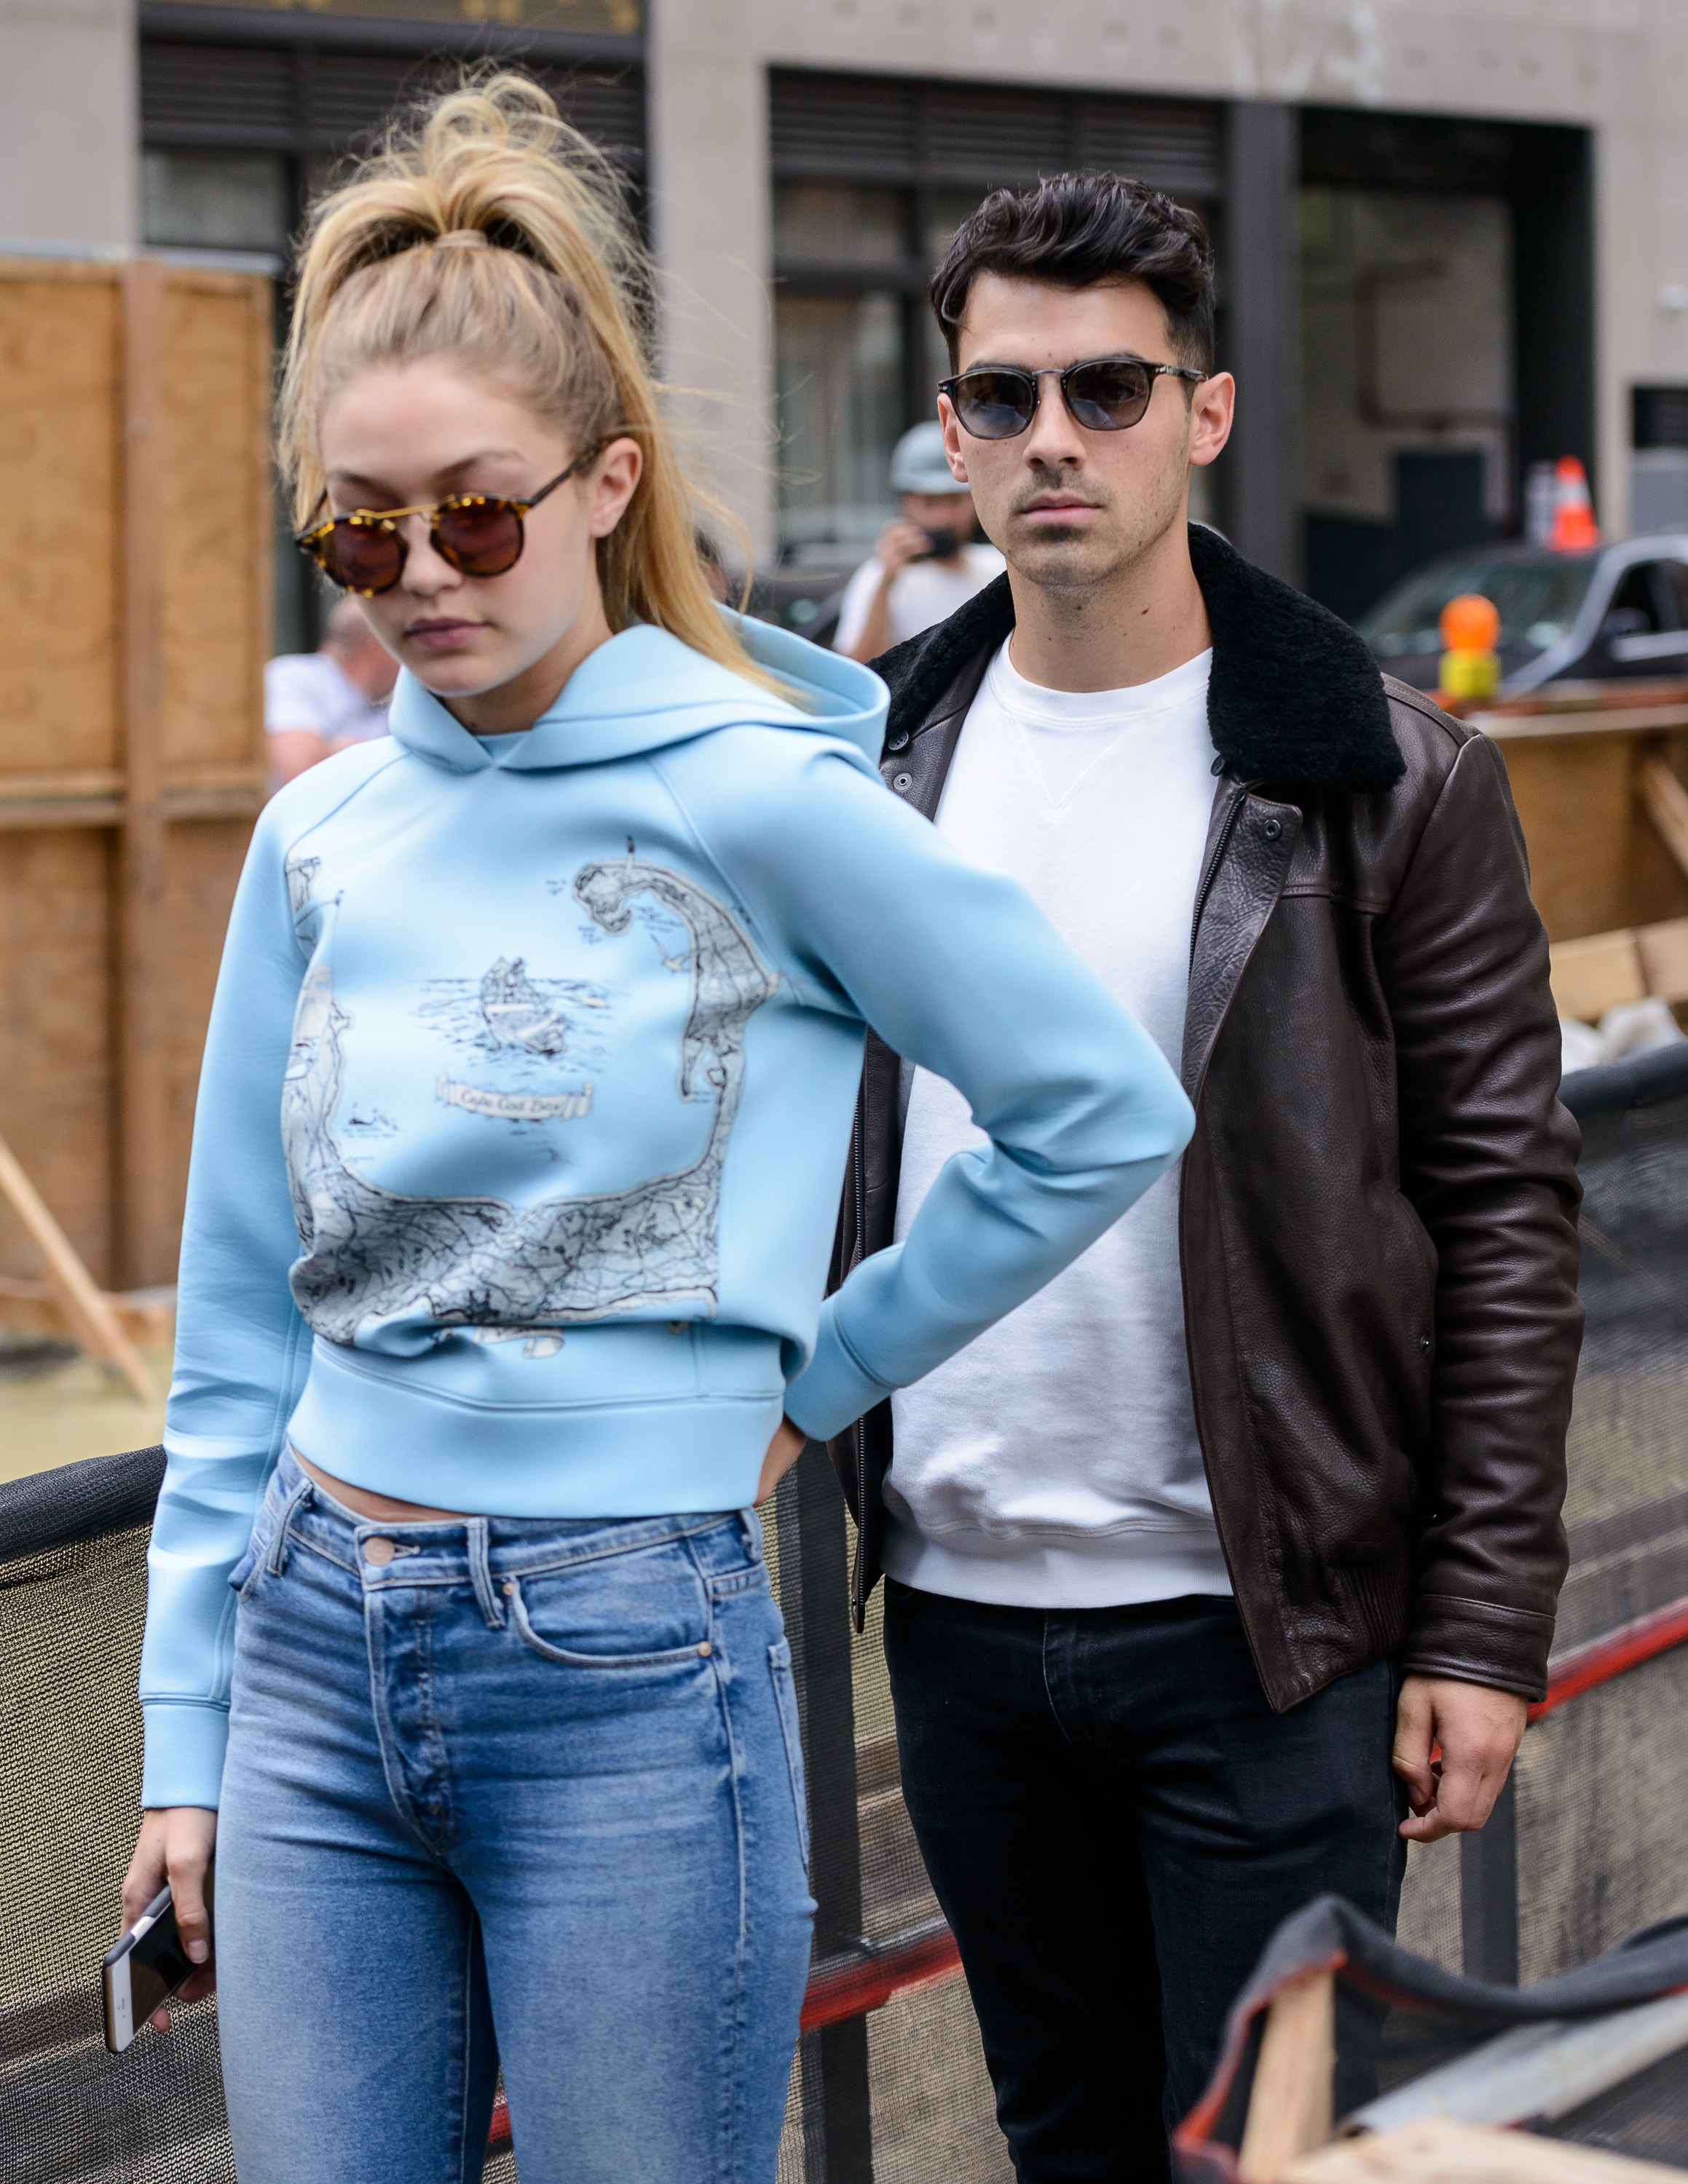 Joe Jonas and Gigi Hadid pictured together in October 2015